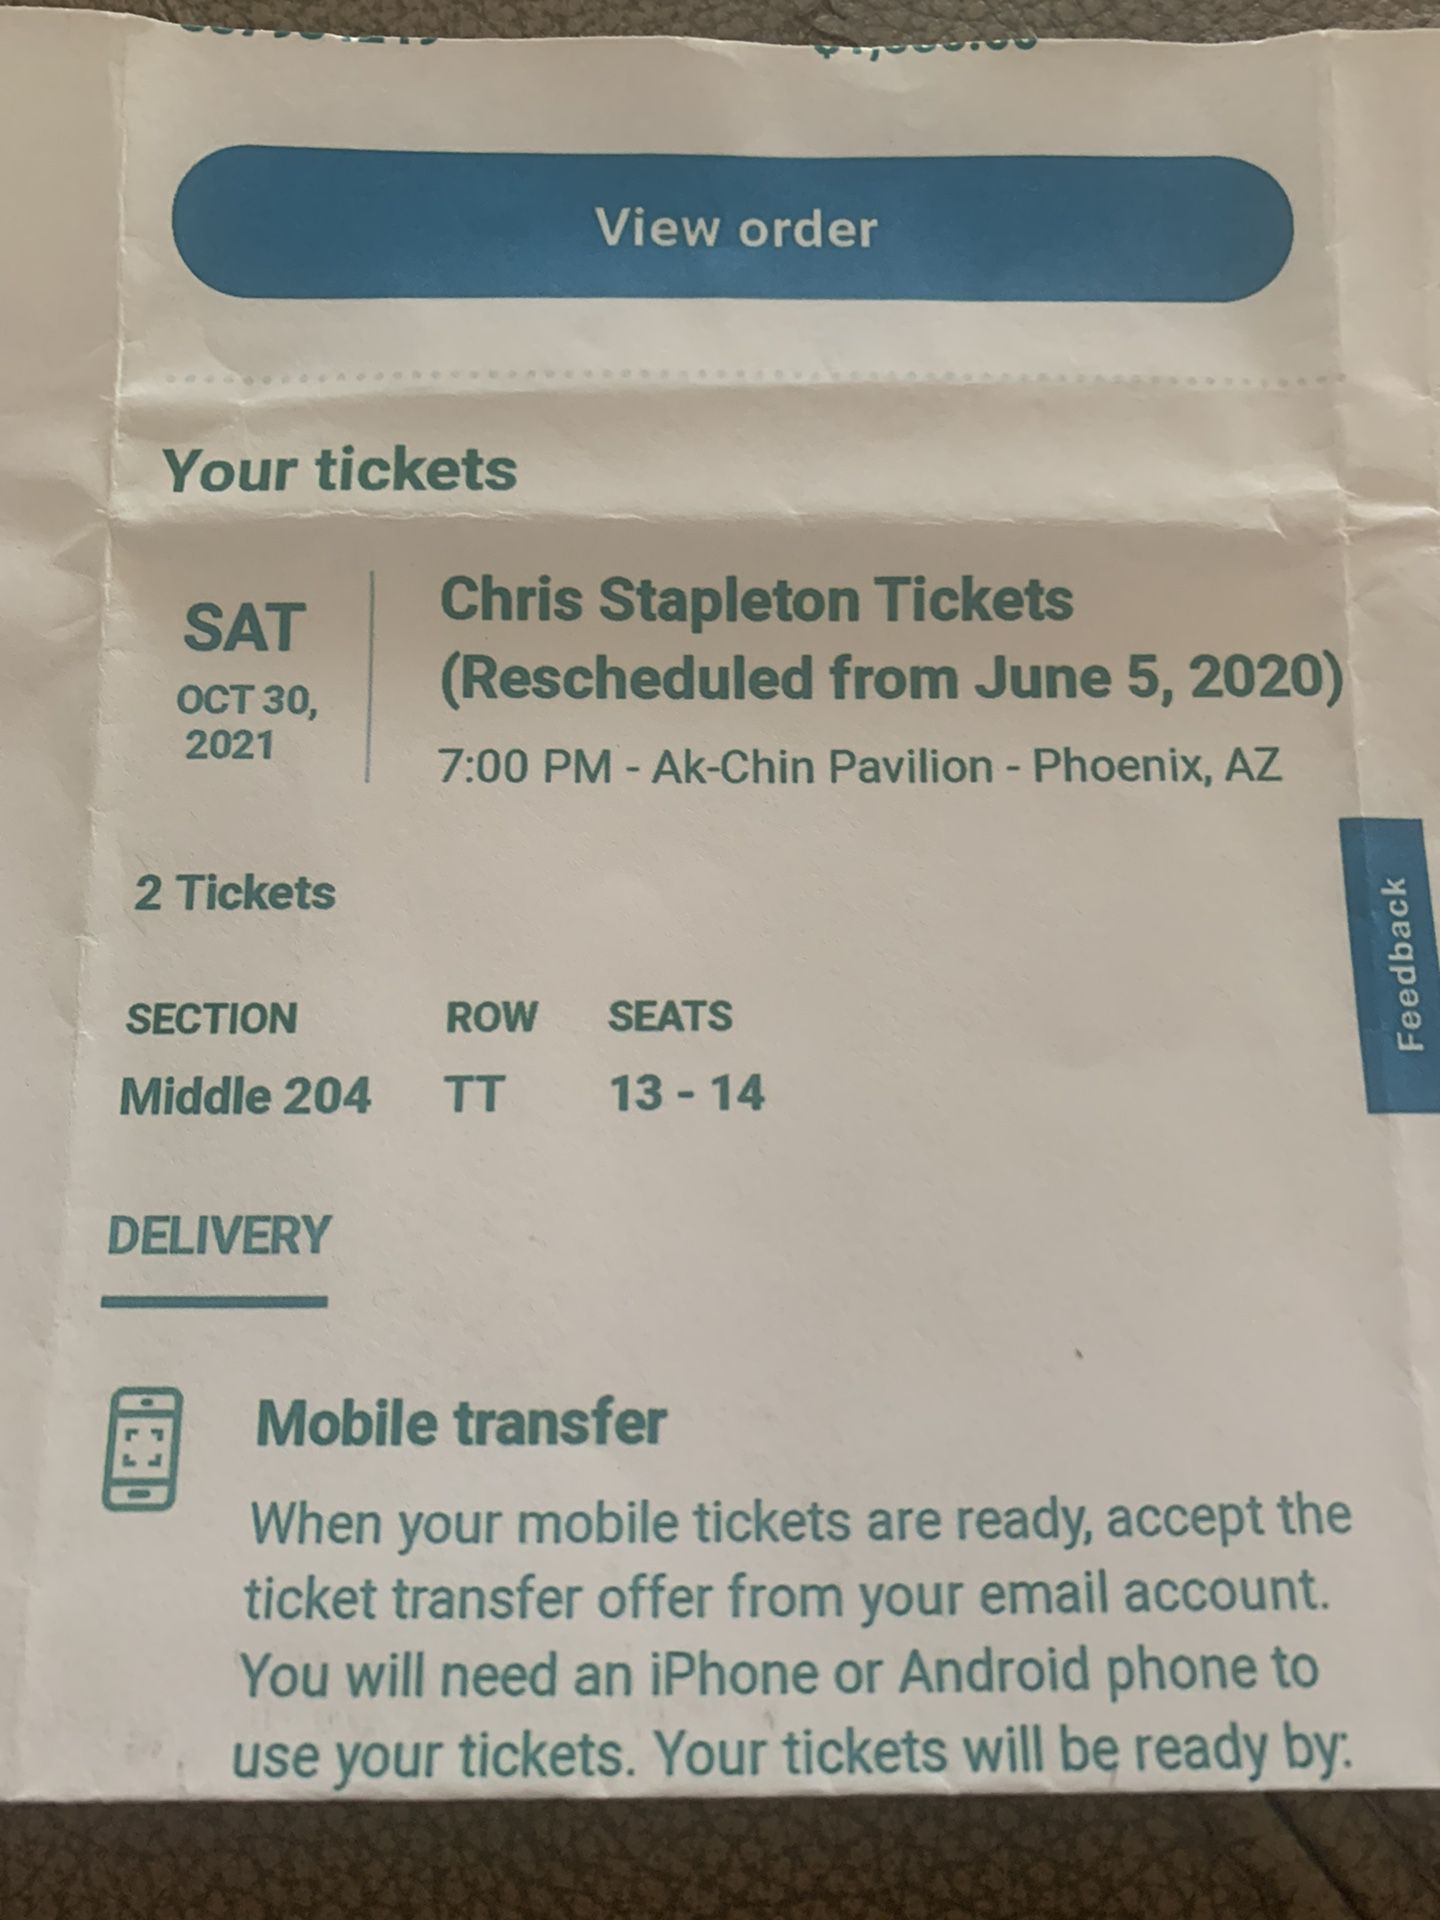  Chris Stapleton tickets available. Excellent seats. Taking offers, Paid over $500 per ticket